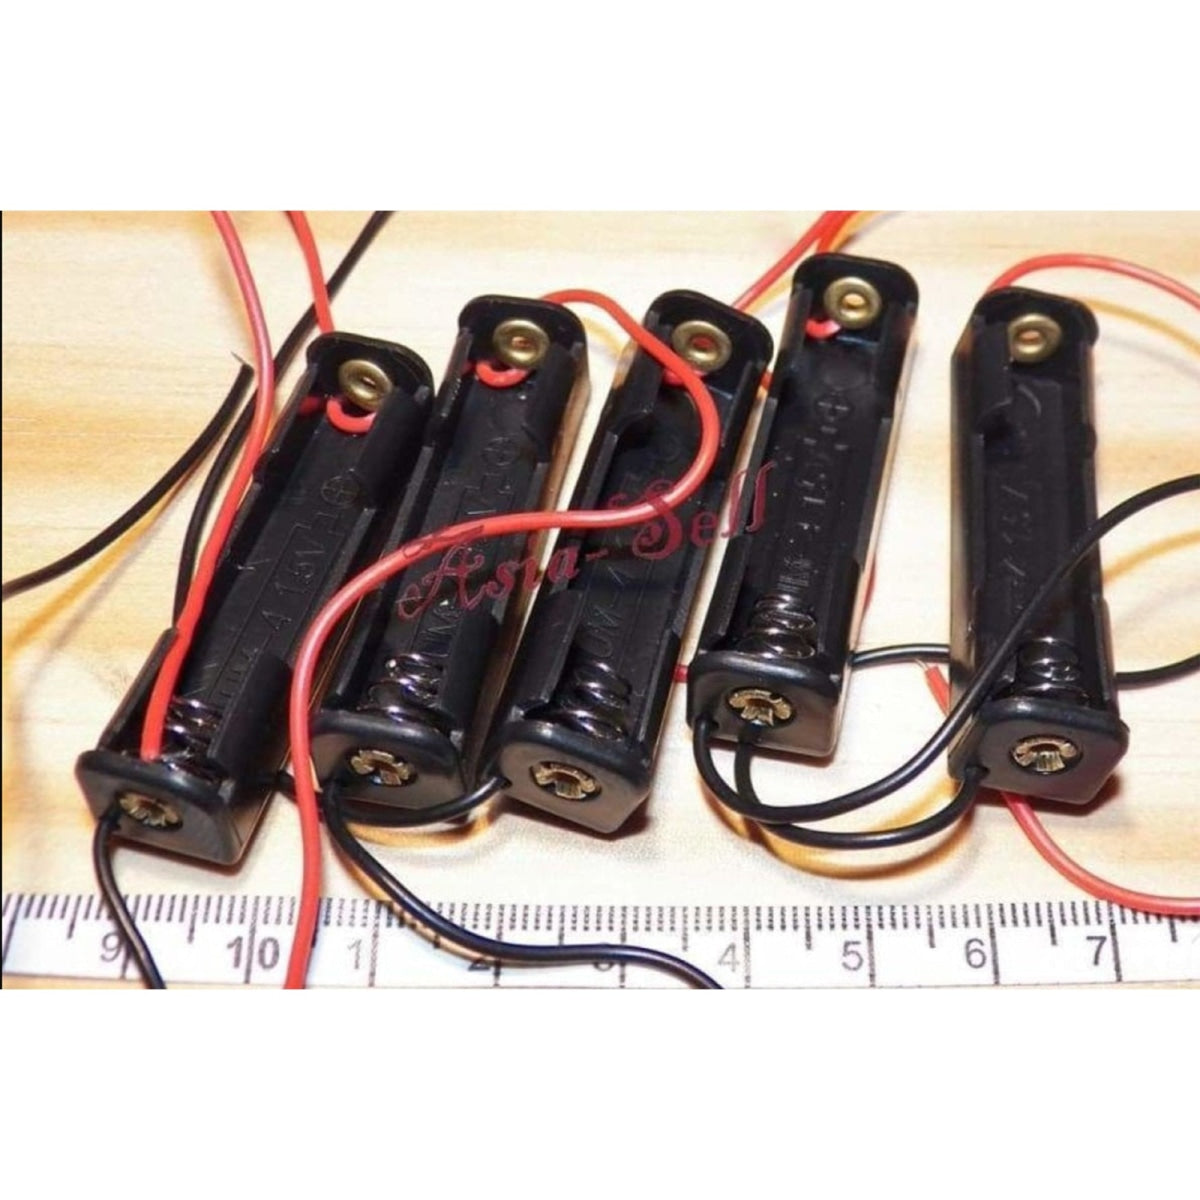 5Pcs 1Xaaa Battery Holder 1X1.5V Storage Box Case Leads Wires 1 X Aaa 1.5V Holders